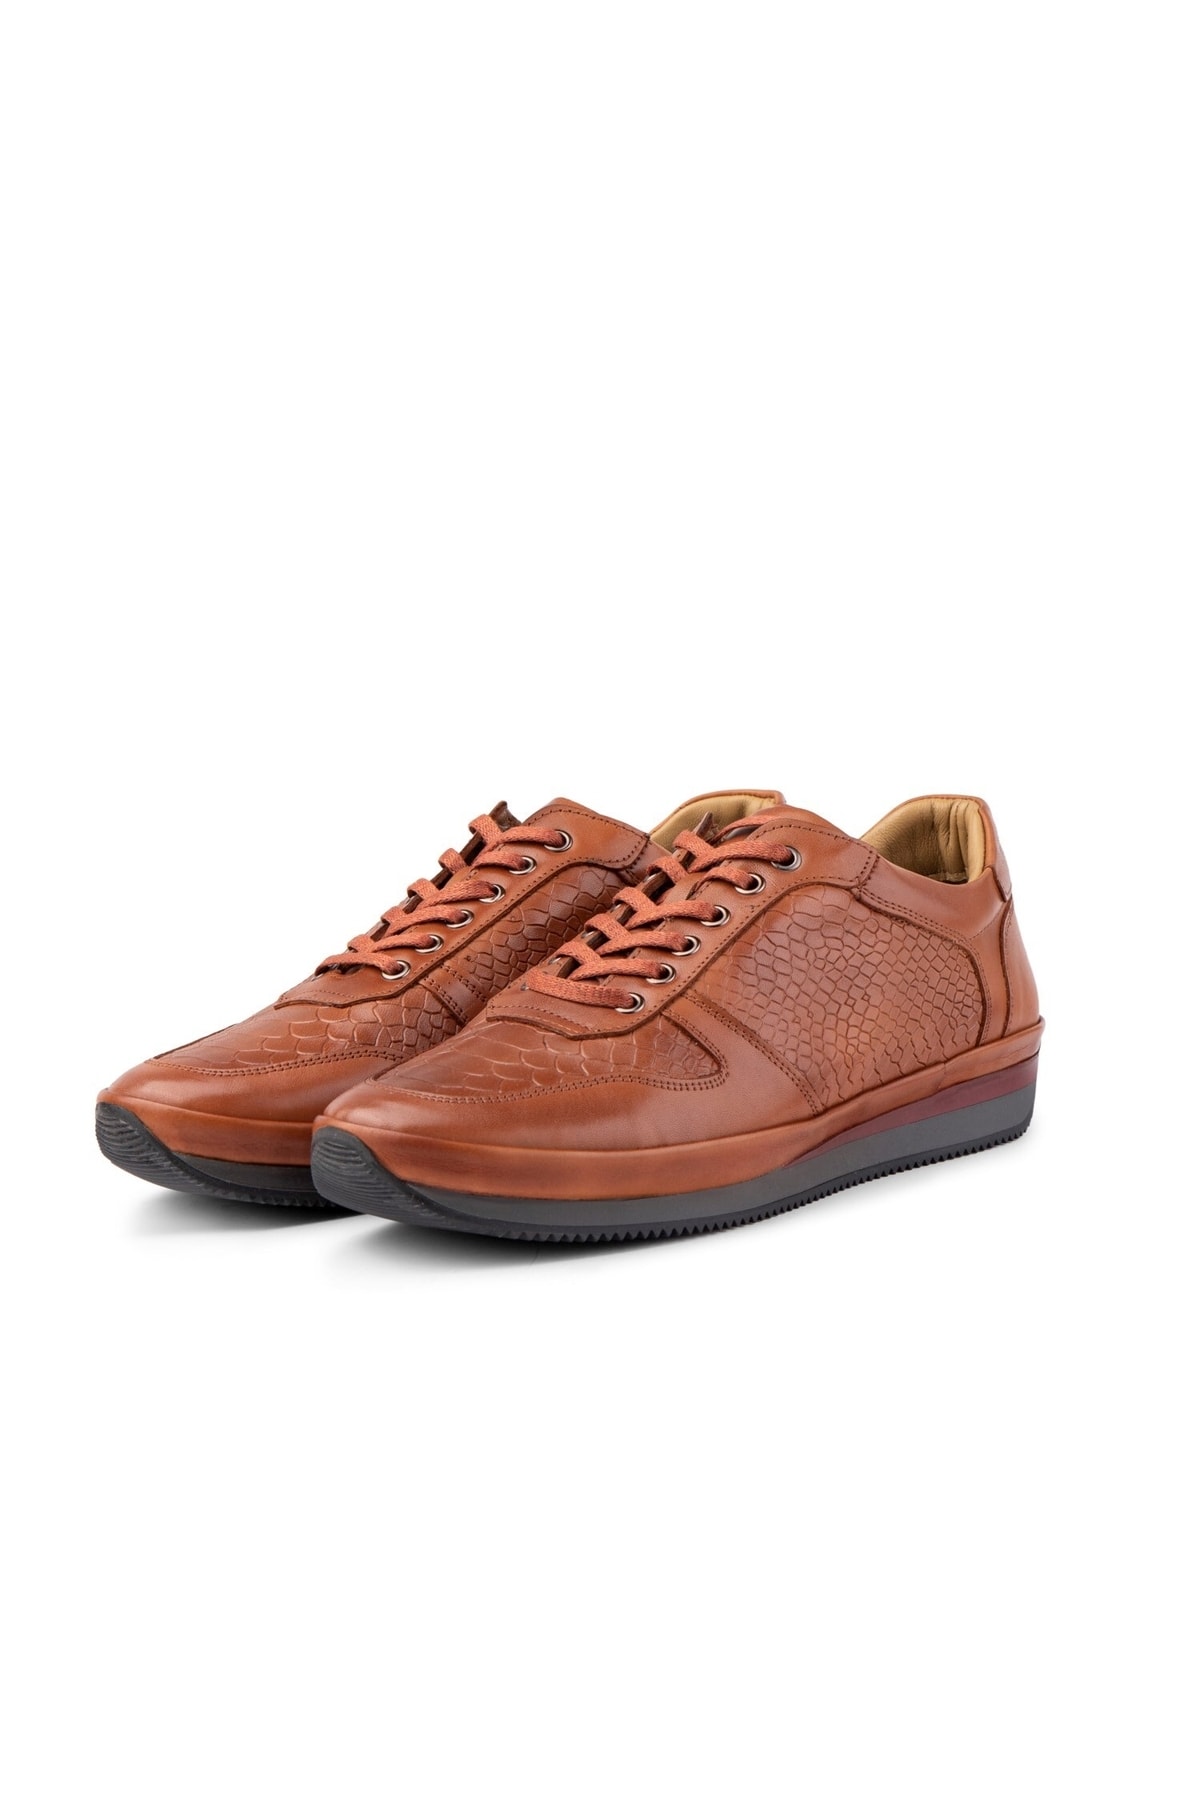 Levně Ducavelli Muster Genuine Leather Men's Casual Shoes, Sheepskin Inner Shoes, Winter Shearling Shoes.